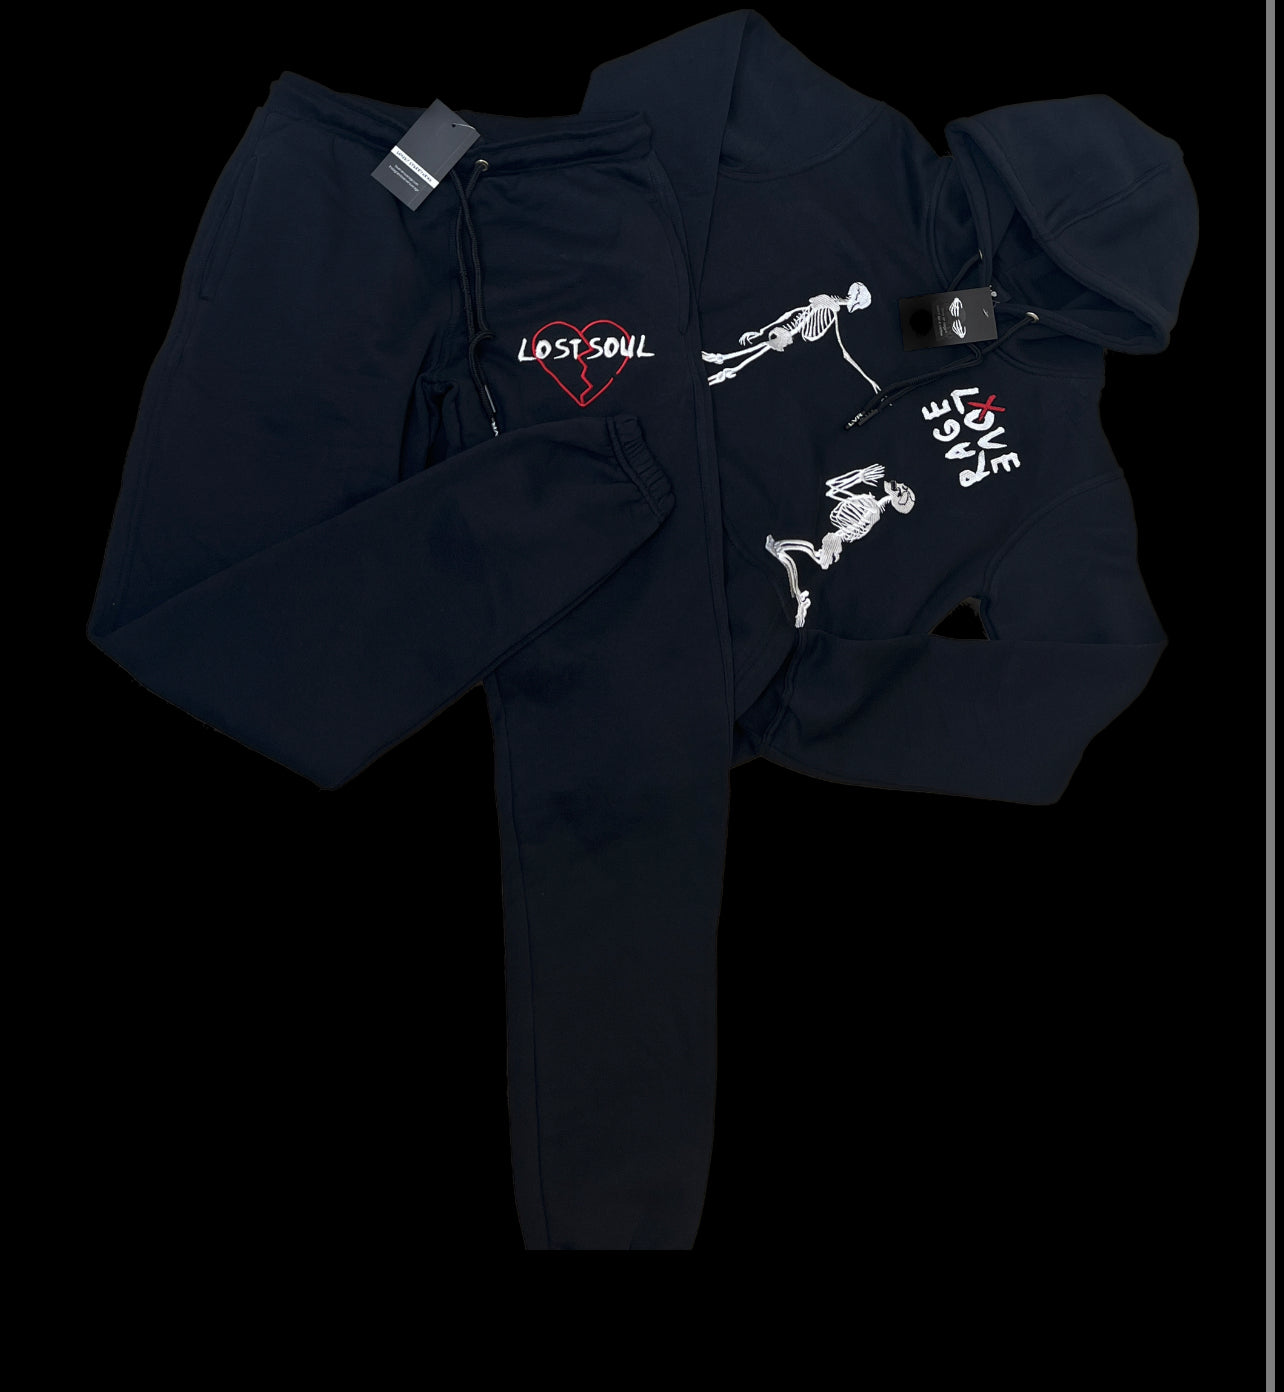 “2 Lost Souls” Pull Over Sweatsuit *PREMADE* S-1XL